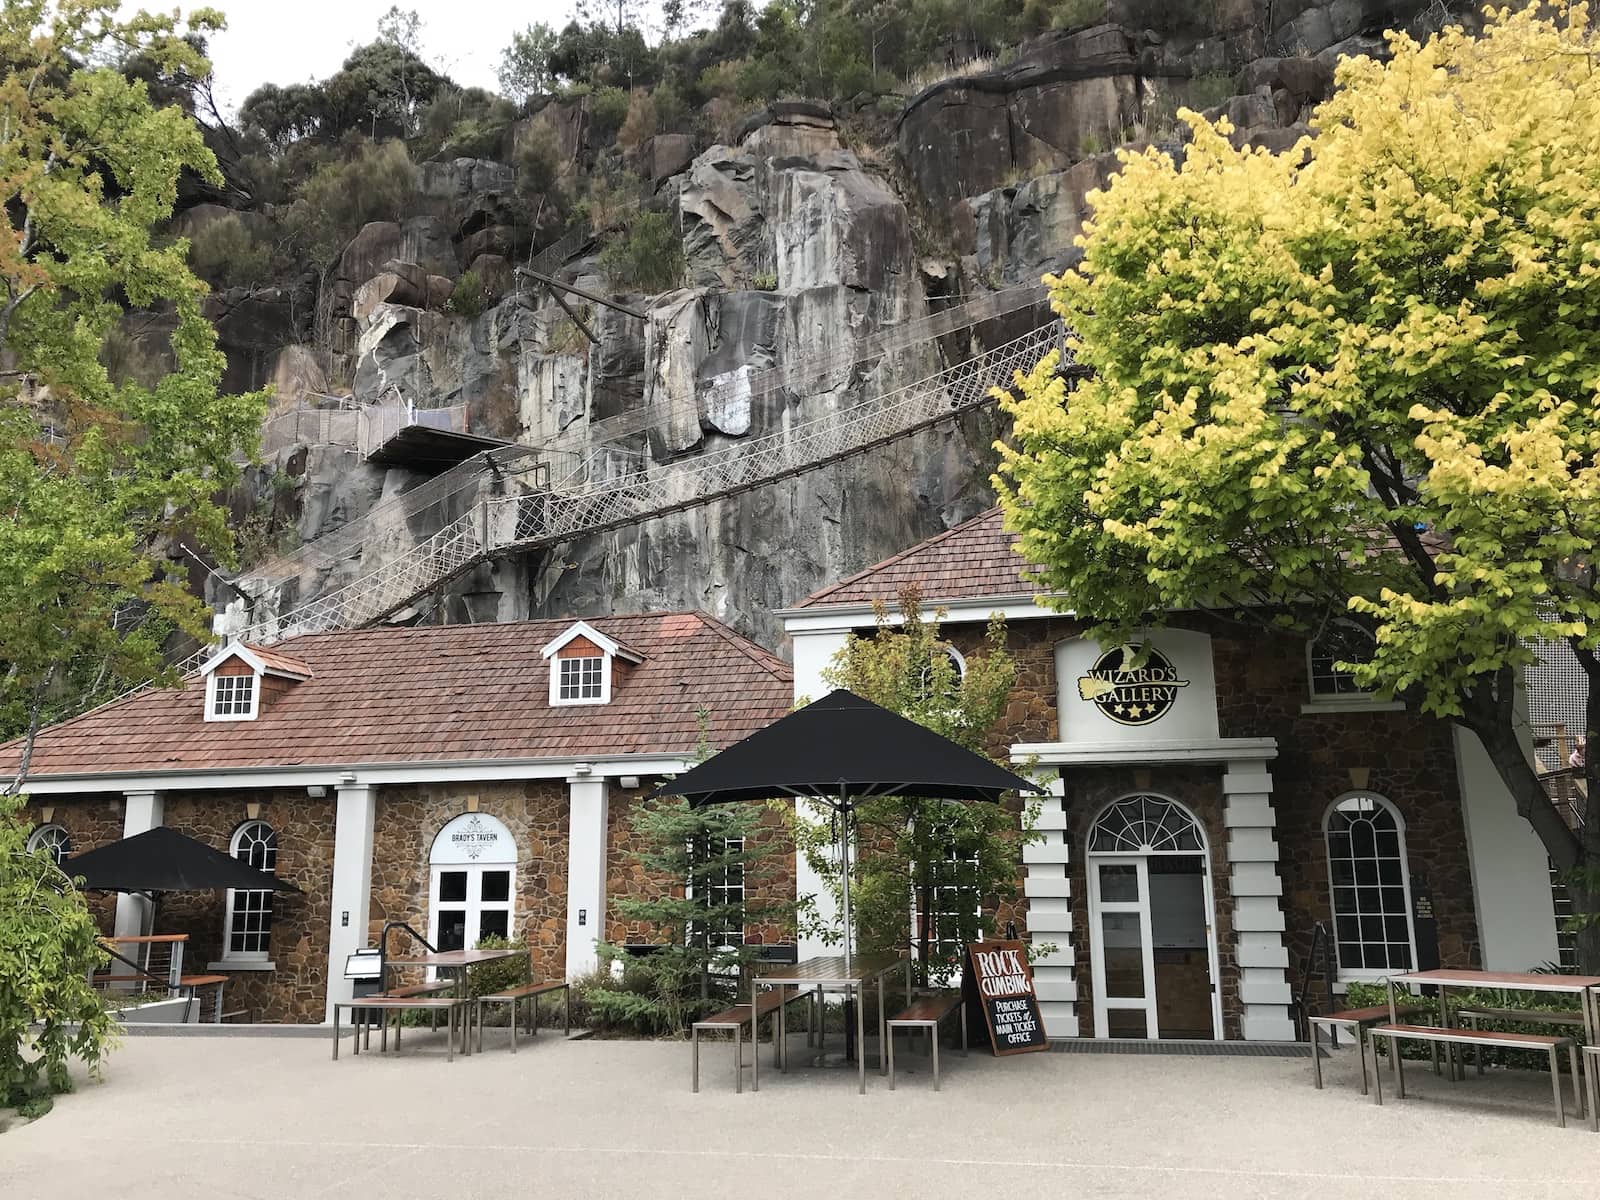 The front of cafes built in colonial style, in front of a rock face